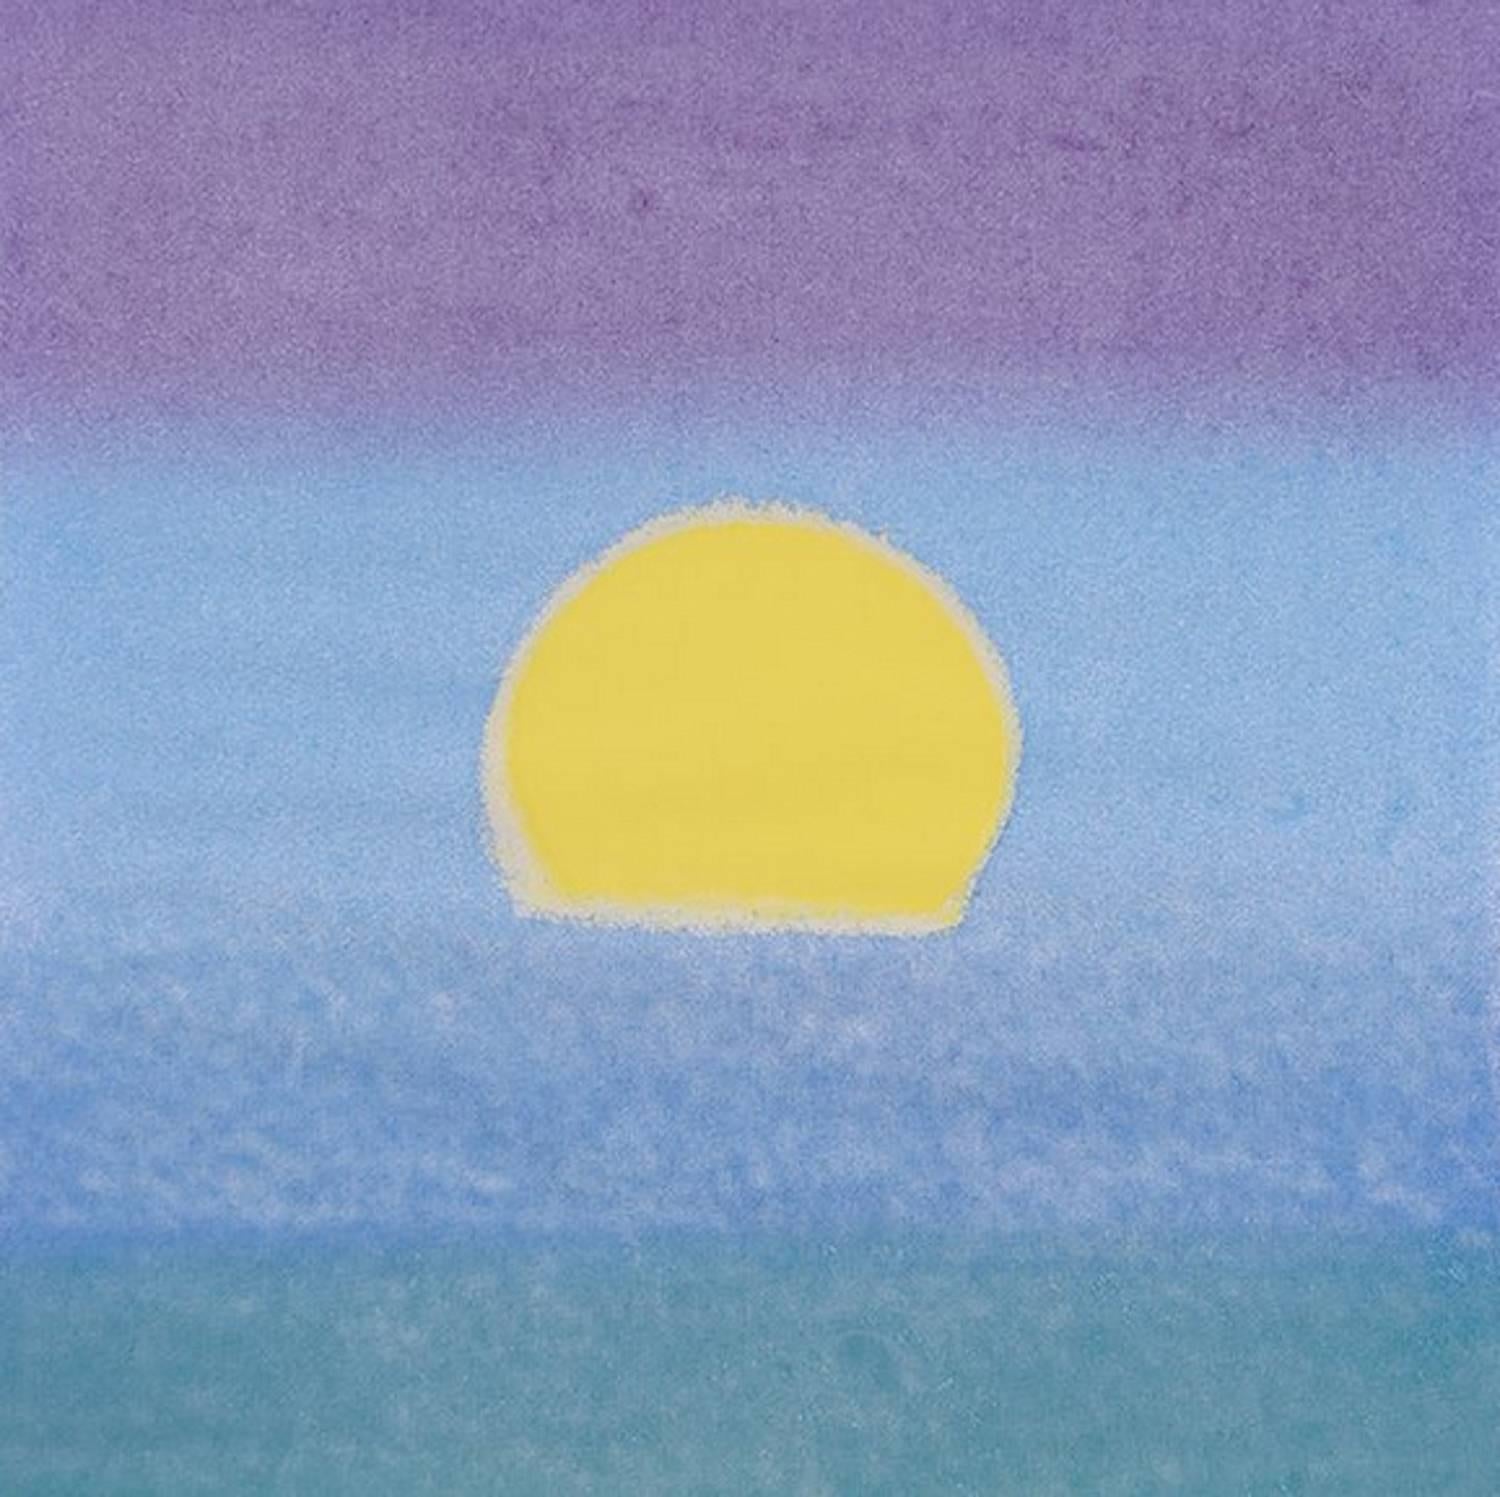 Sunset (Unique) (Yellow/Blue/Green) - Print by Andy Warhol